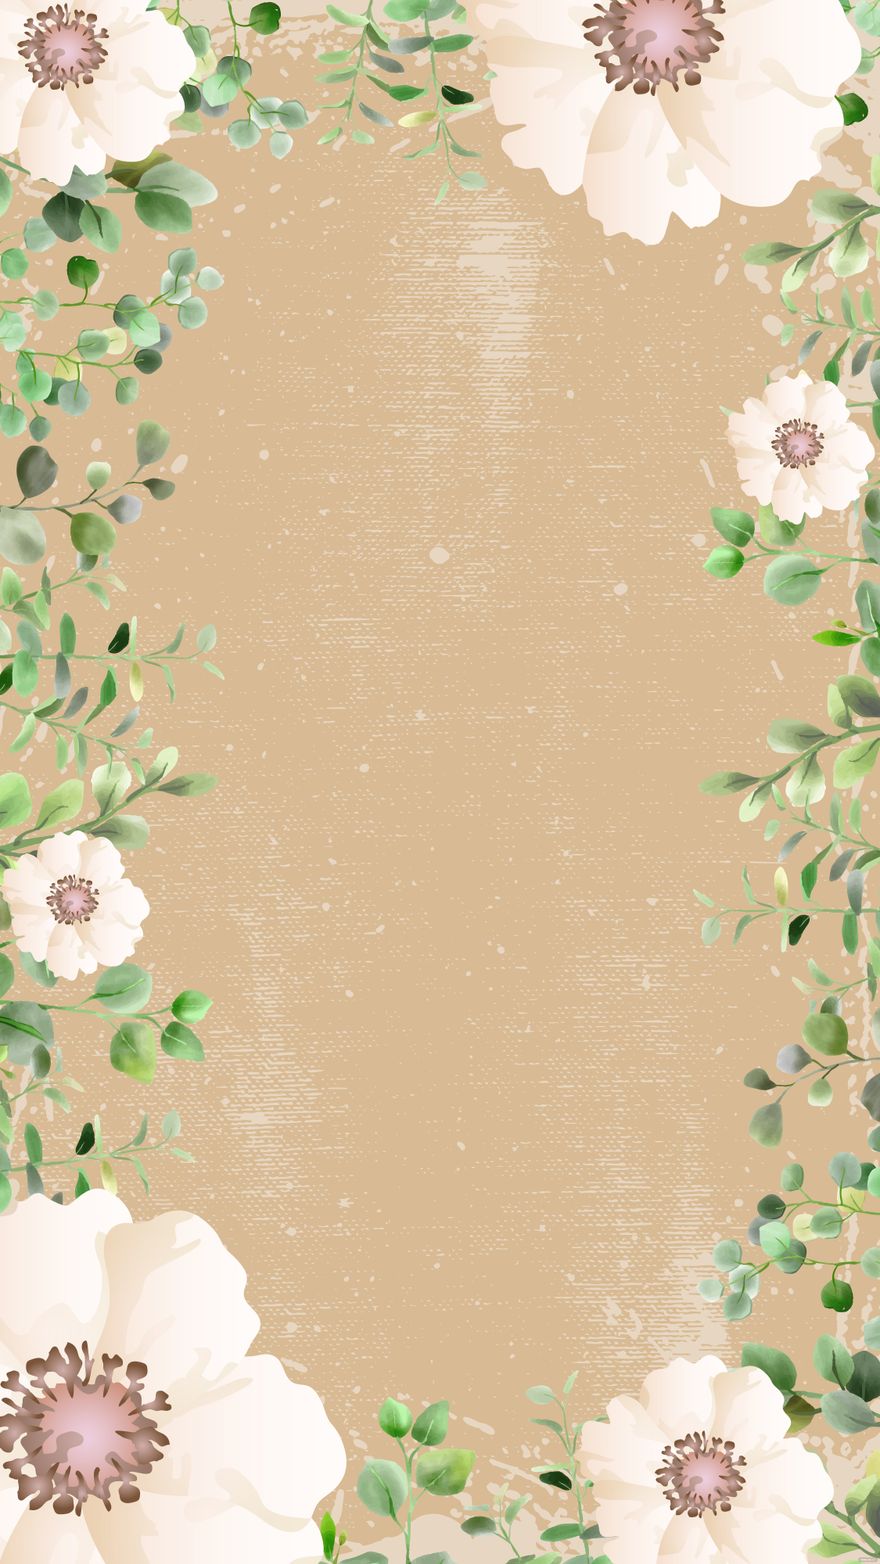 Free Rustic Spring Floral Background